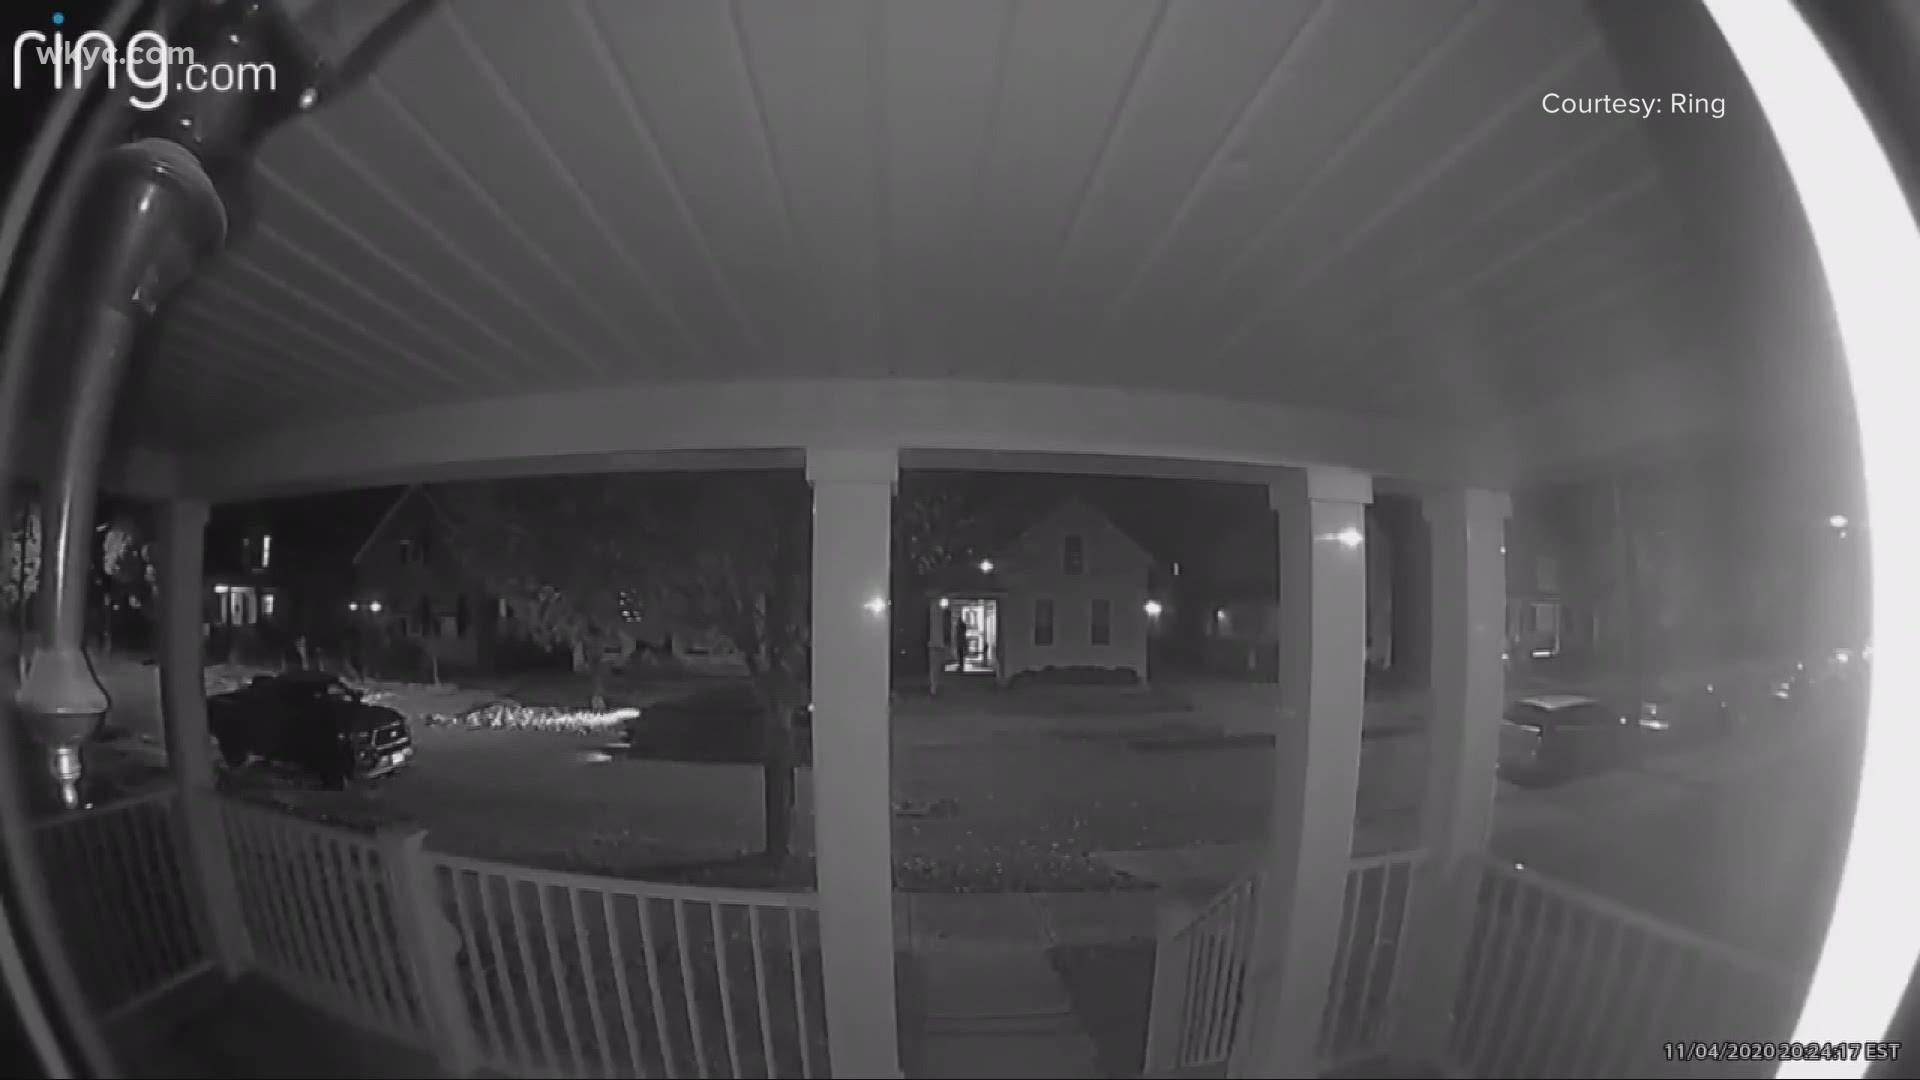 A doorbell camera captured the moment at 11-year-old girl was shot on the city's west side last night. The child was inside and was hit by one of the bullets.